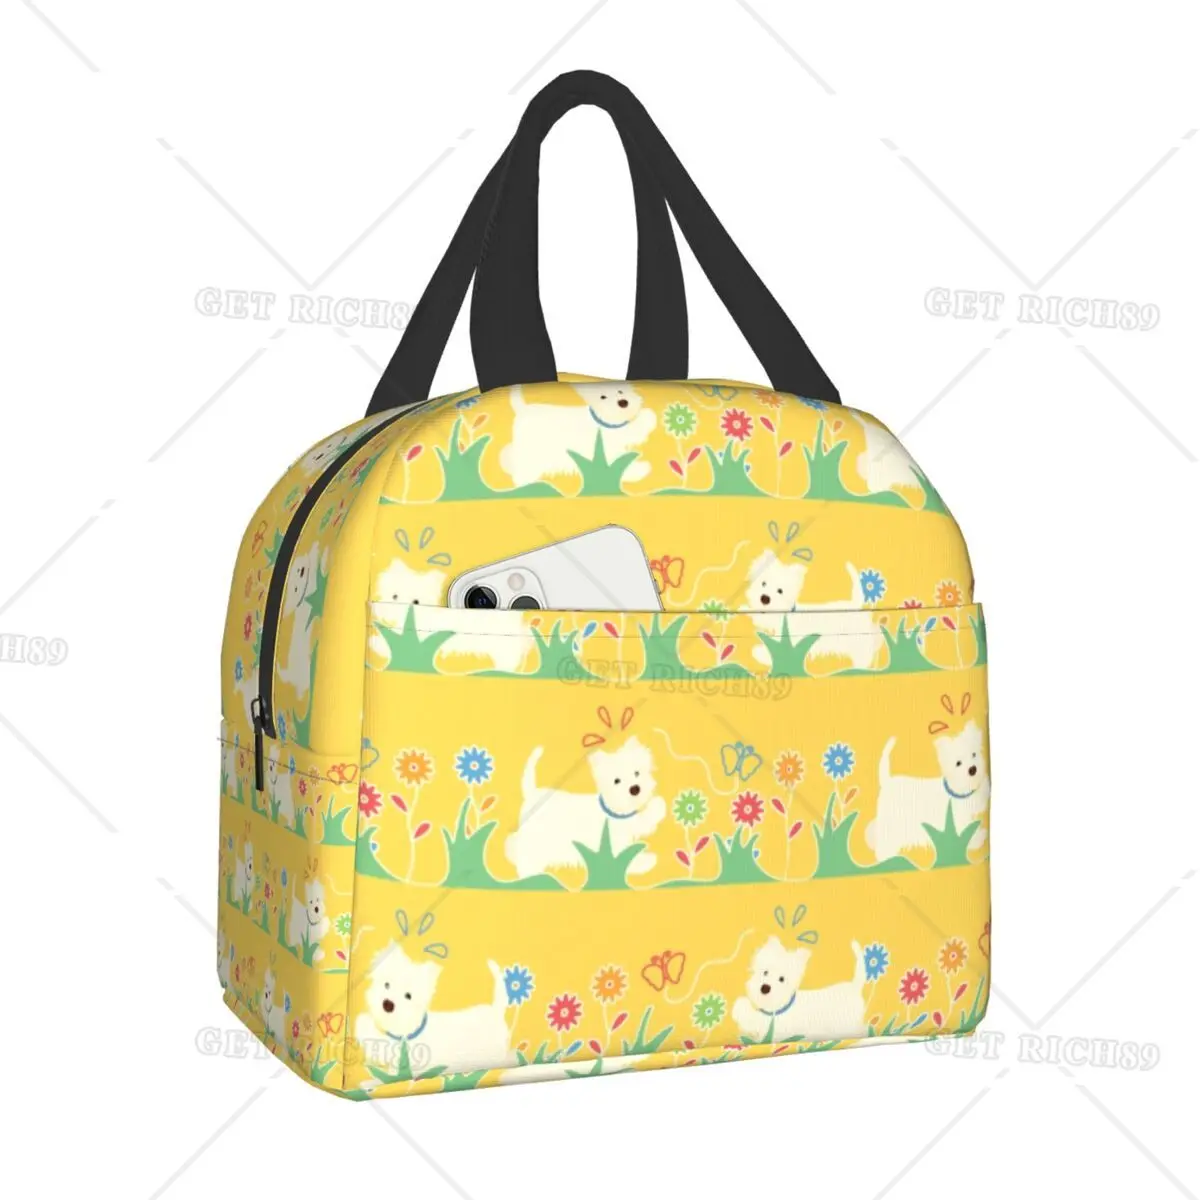 

West Highland Terrier Insulated Lunch Bags for School Office Westie Dog Portable Cooler Thermal Bento Box Women Kids Picnic Bag